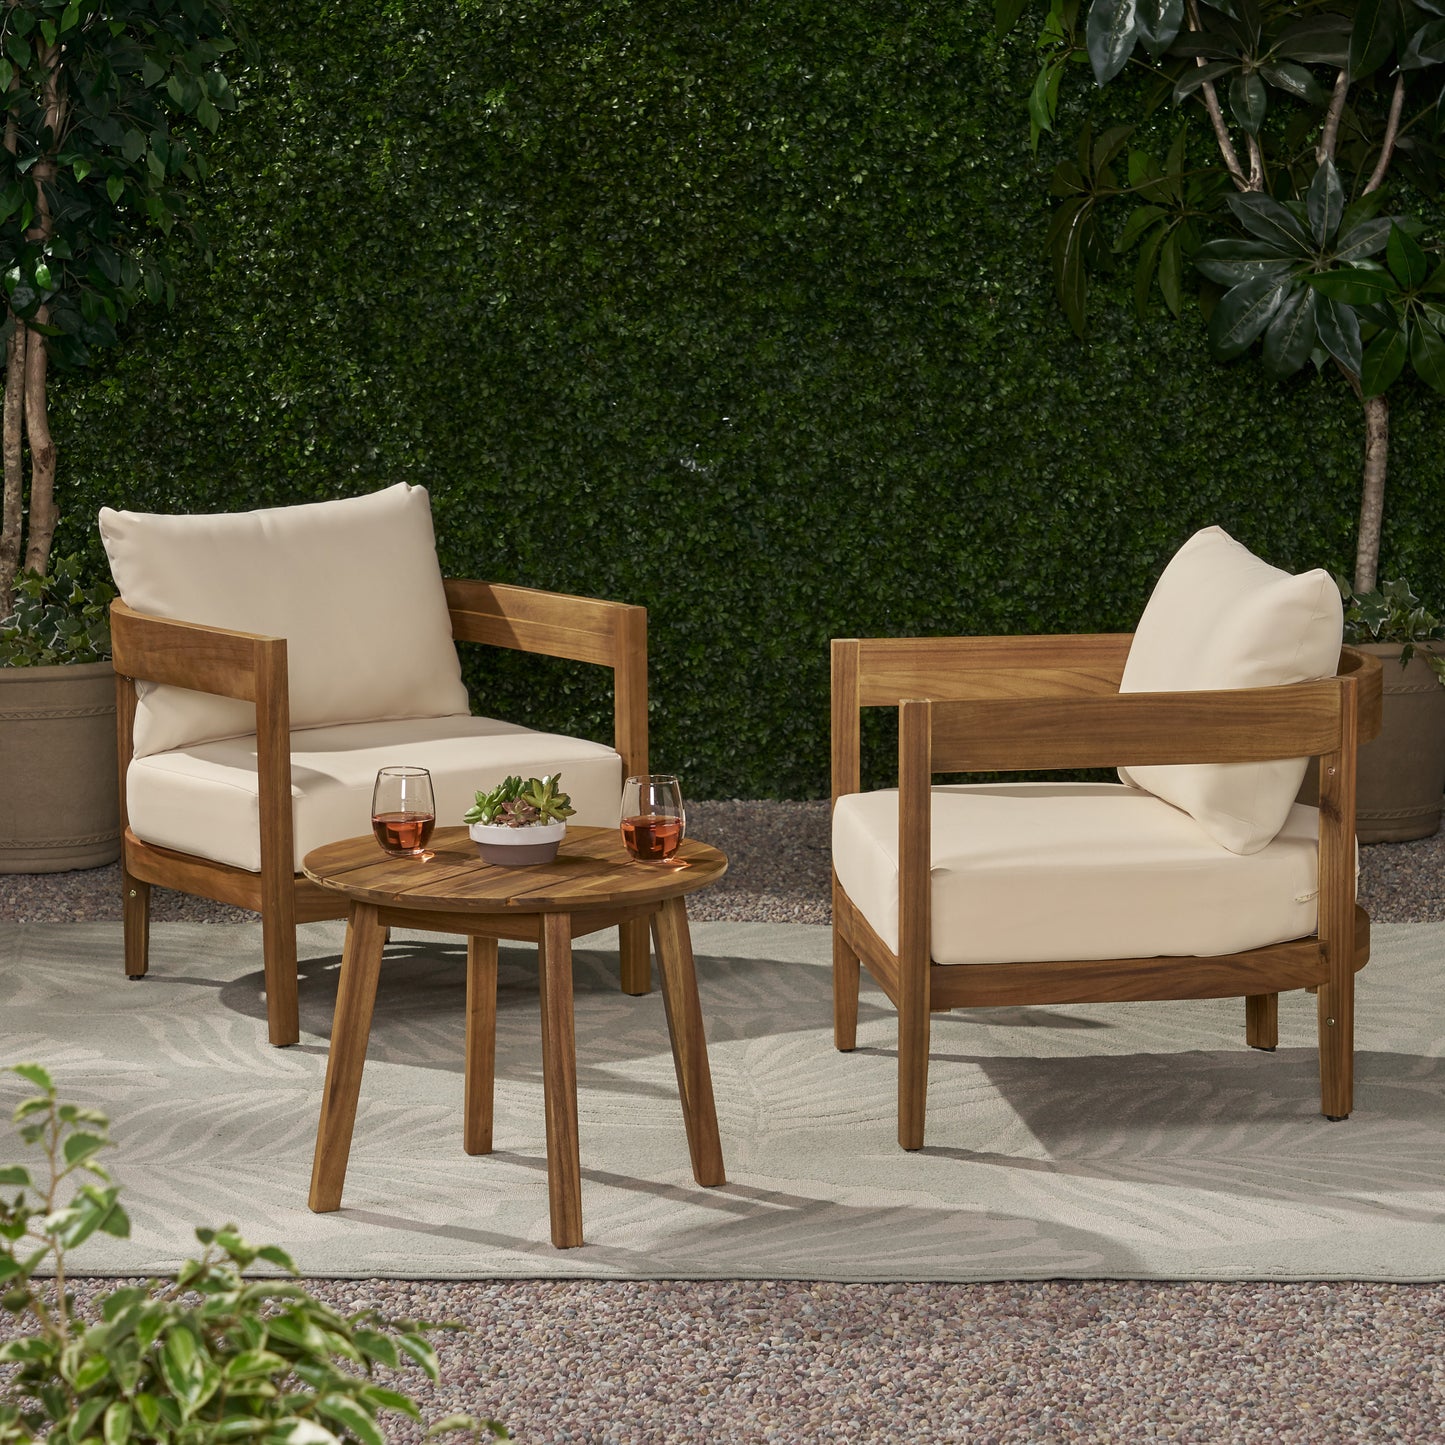 Burrough Outdoor Acacia Wood 2 Seater Chat Set with Cushions